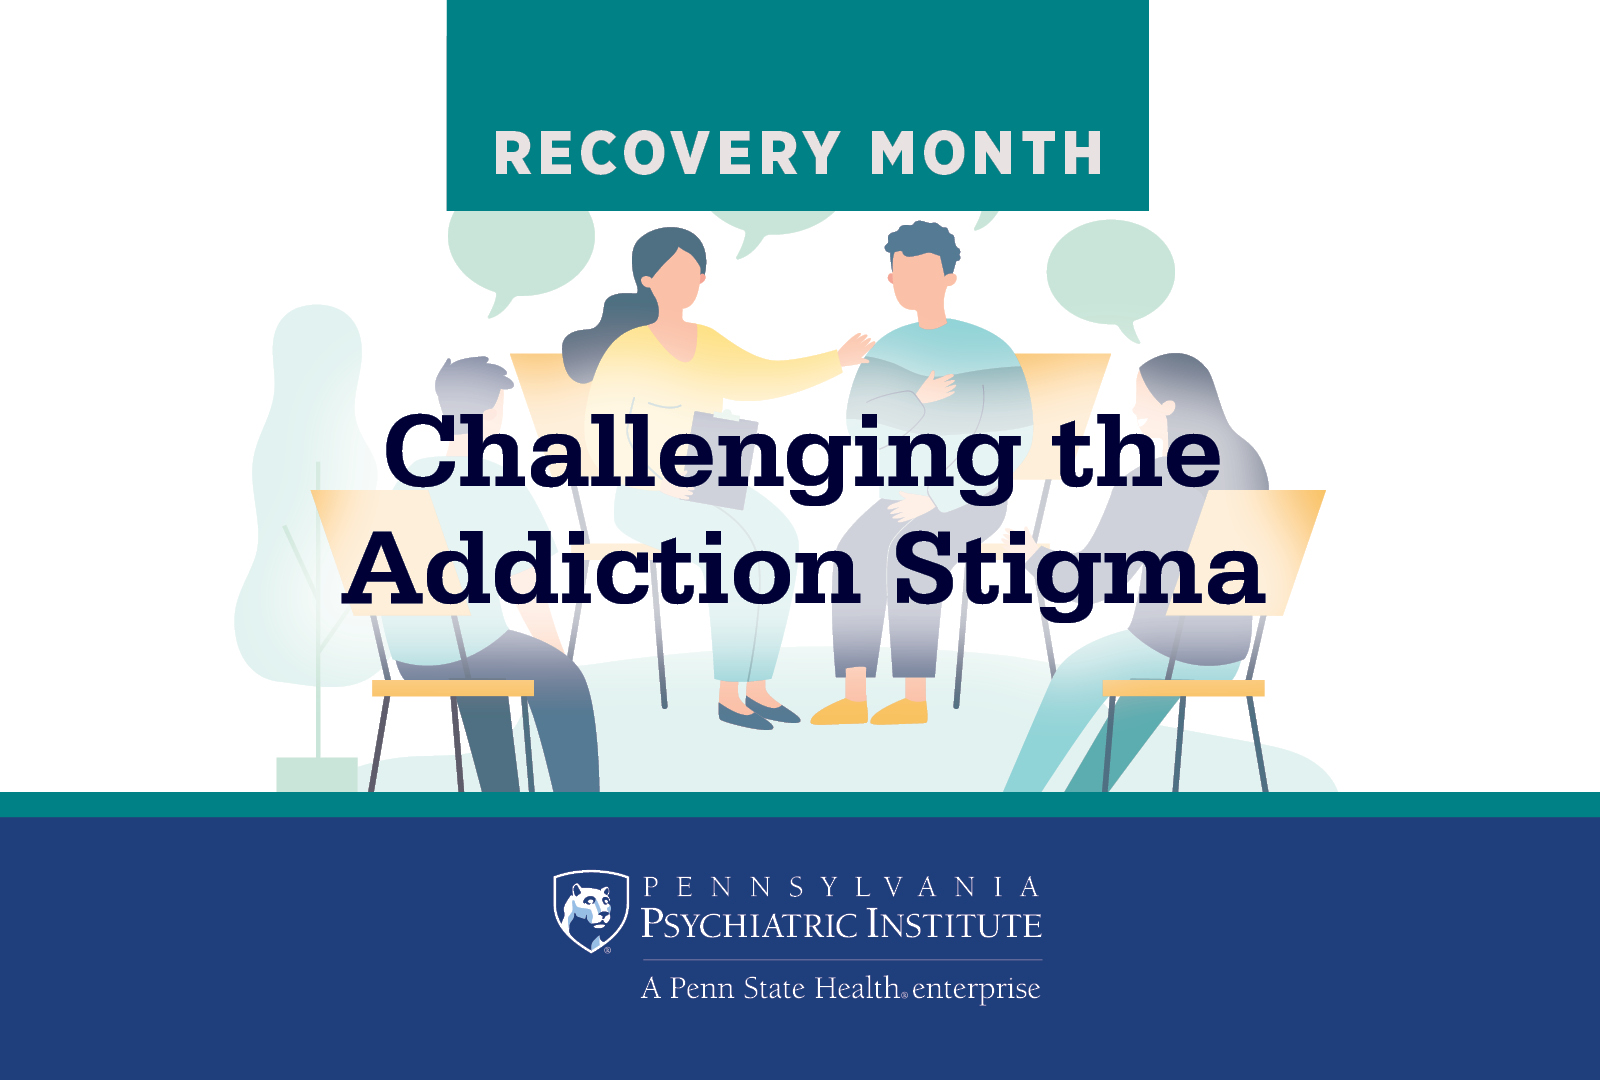 Recovery Month: Challenging the Addiction Stigma